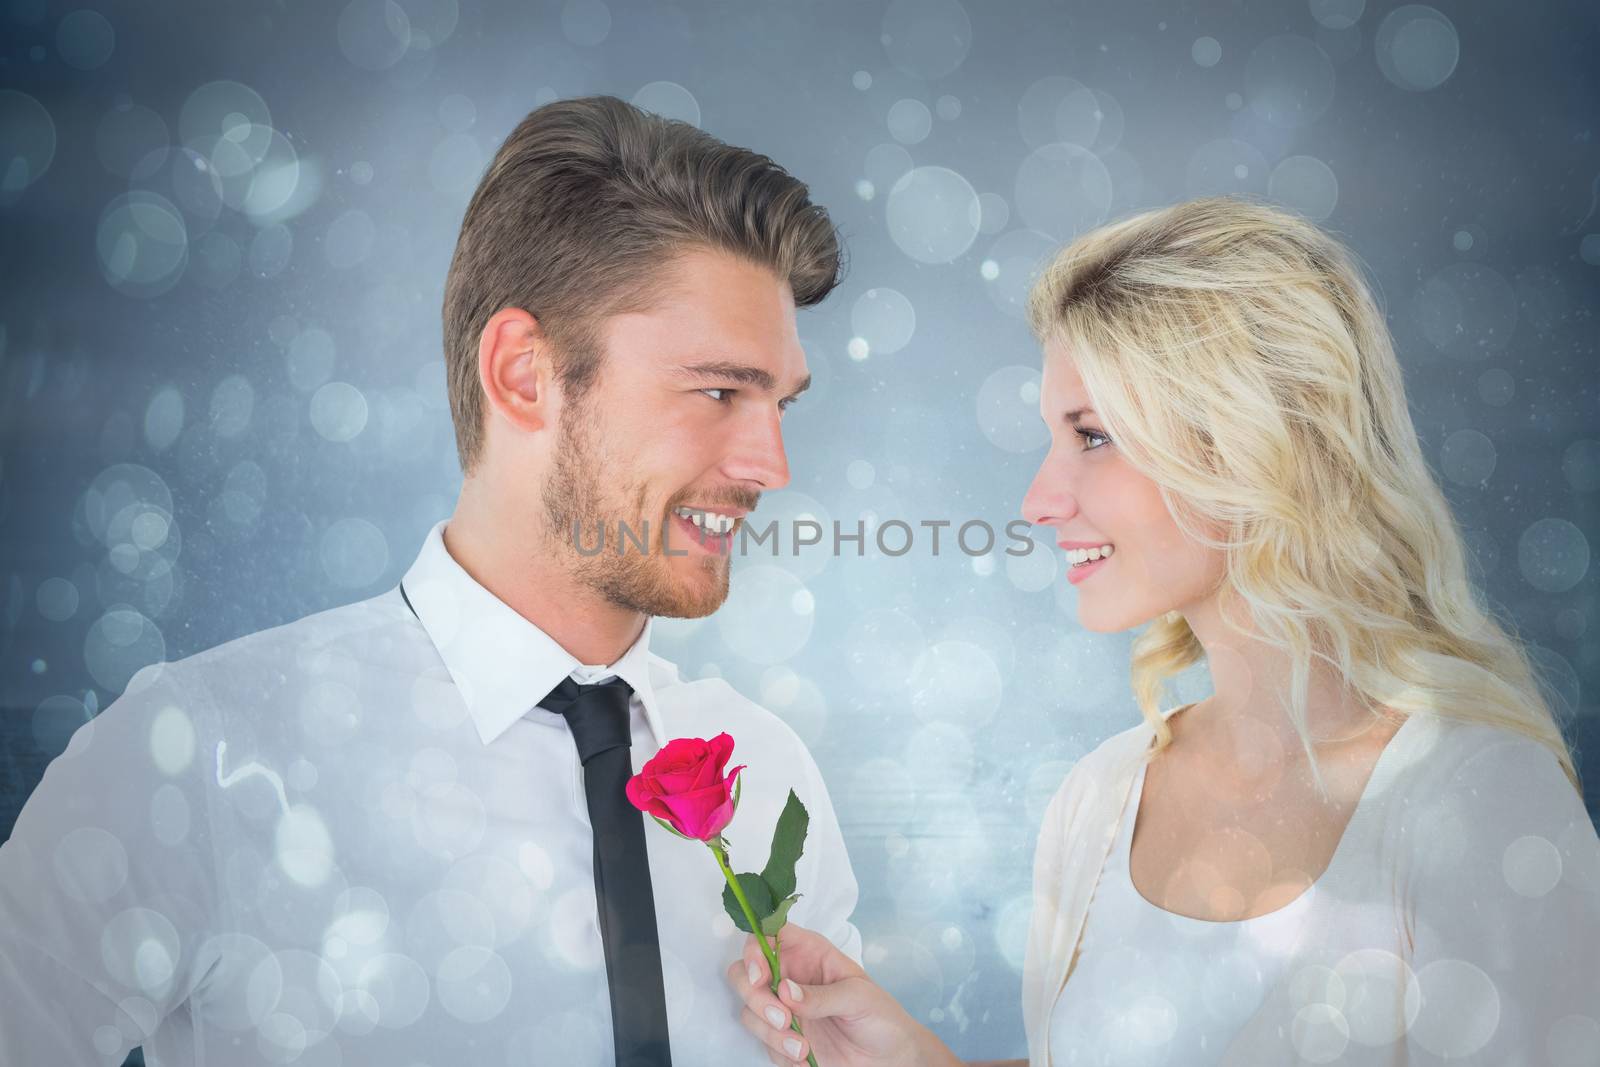 Handsome man smiling at girlfriend holding a rose against blue abstract light spot design